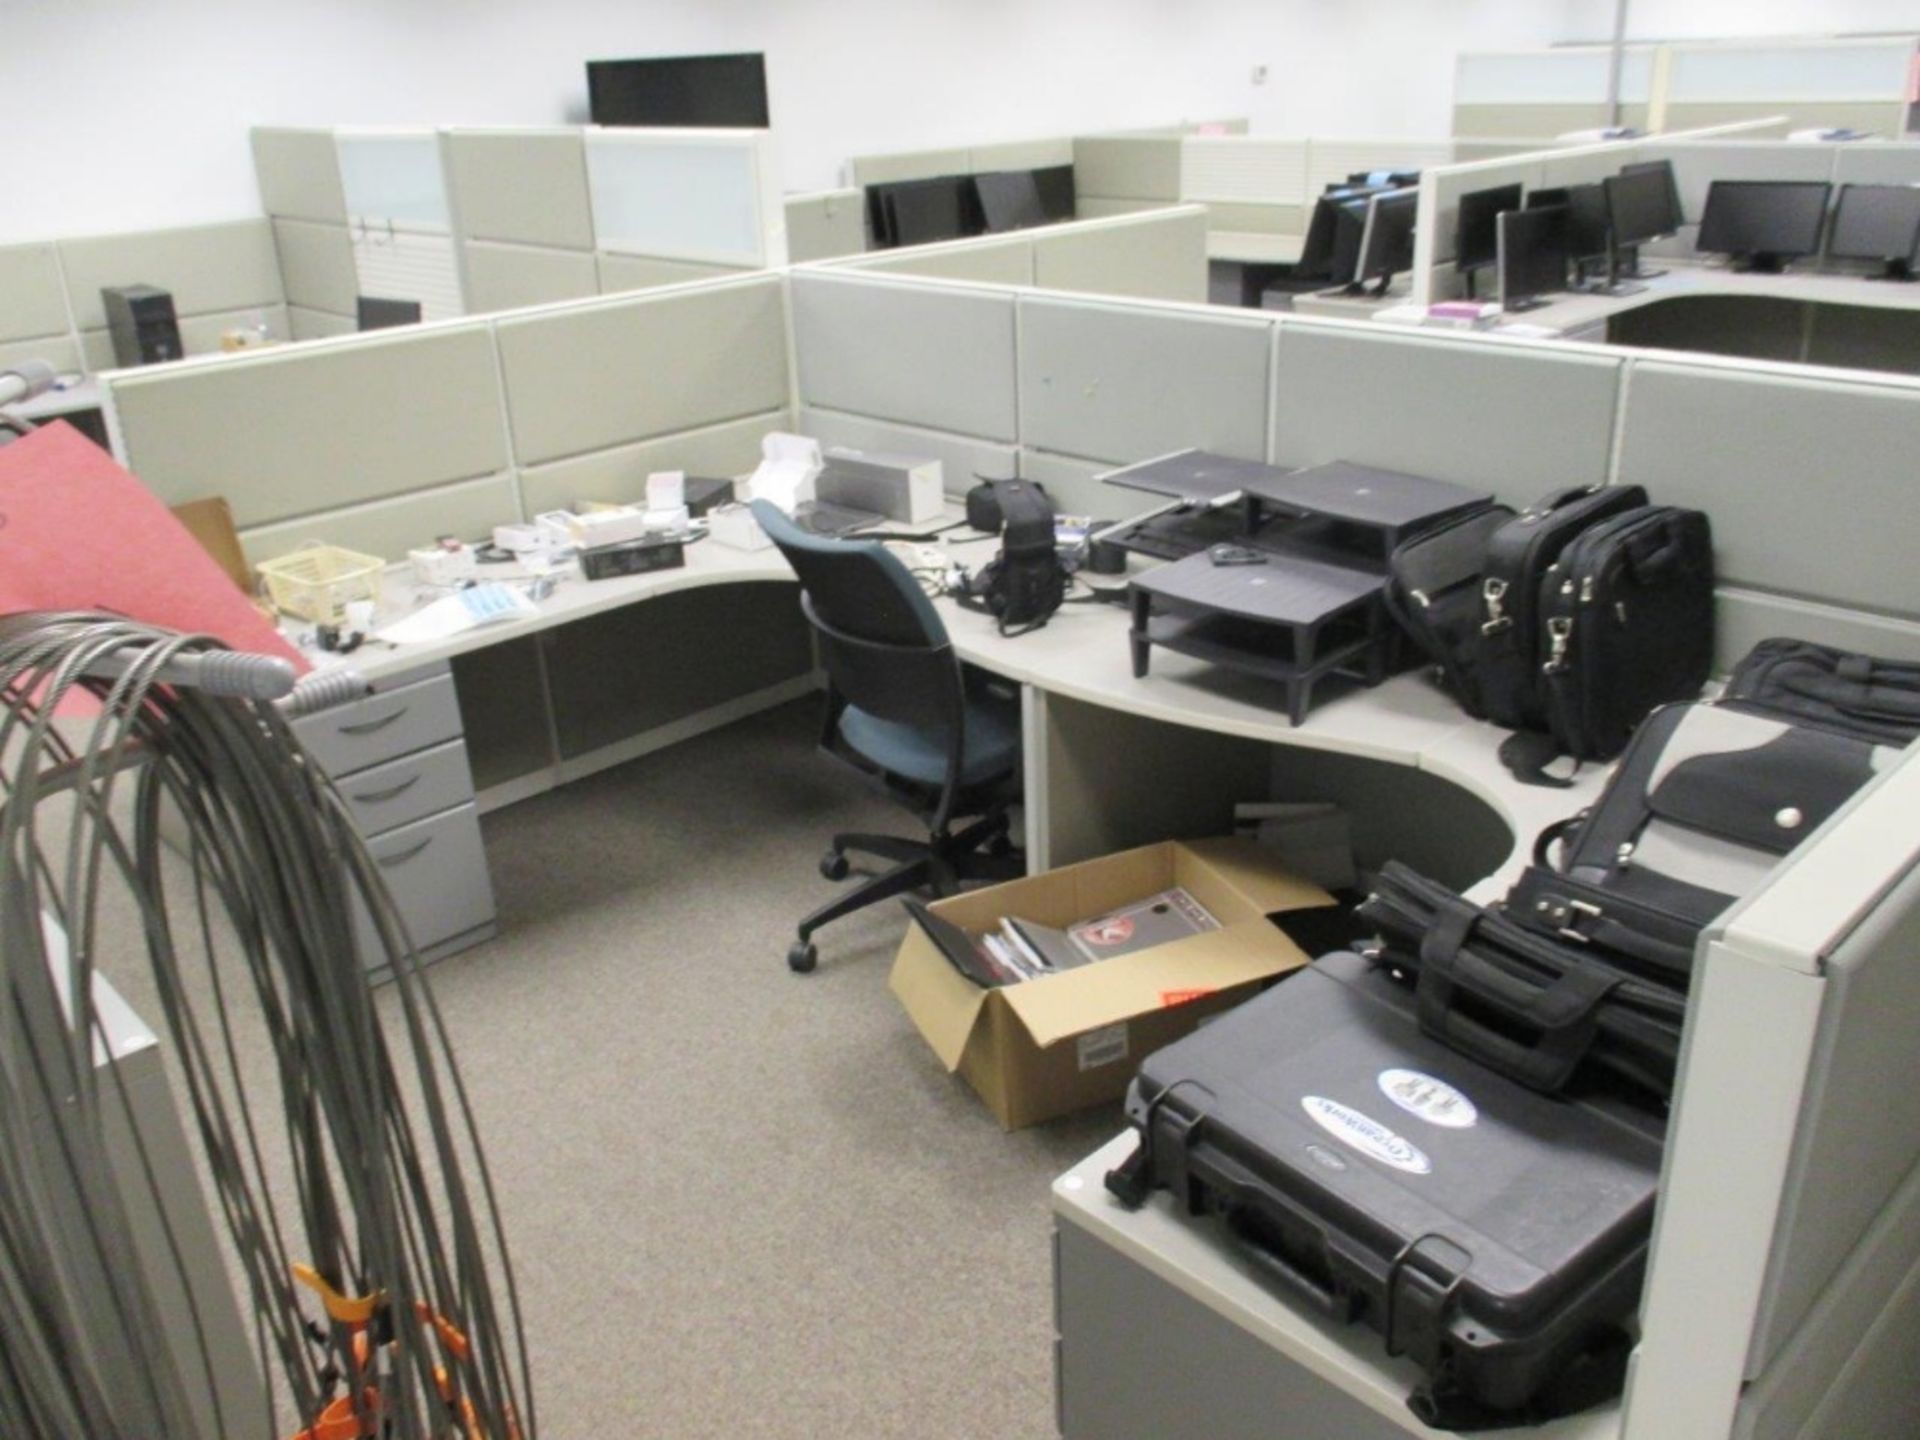 2008 Tecknion 8 Station Work Cubicle System - Image 4 of 6